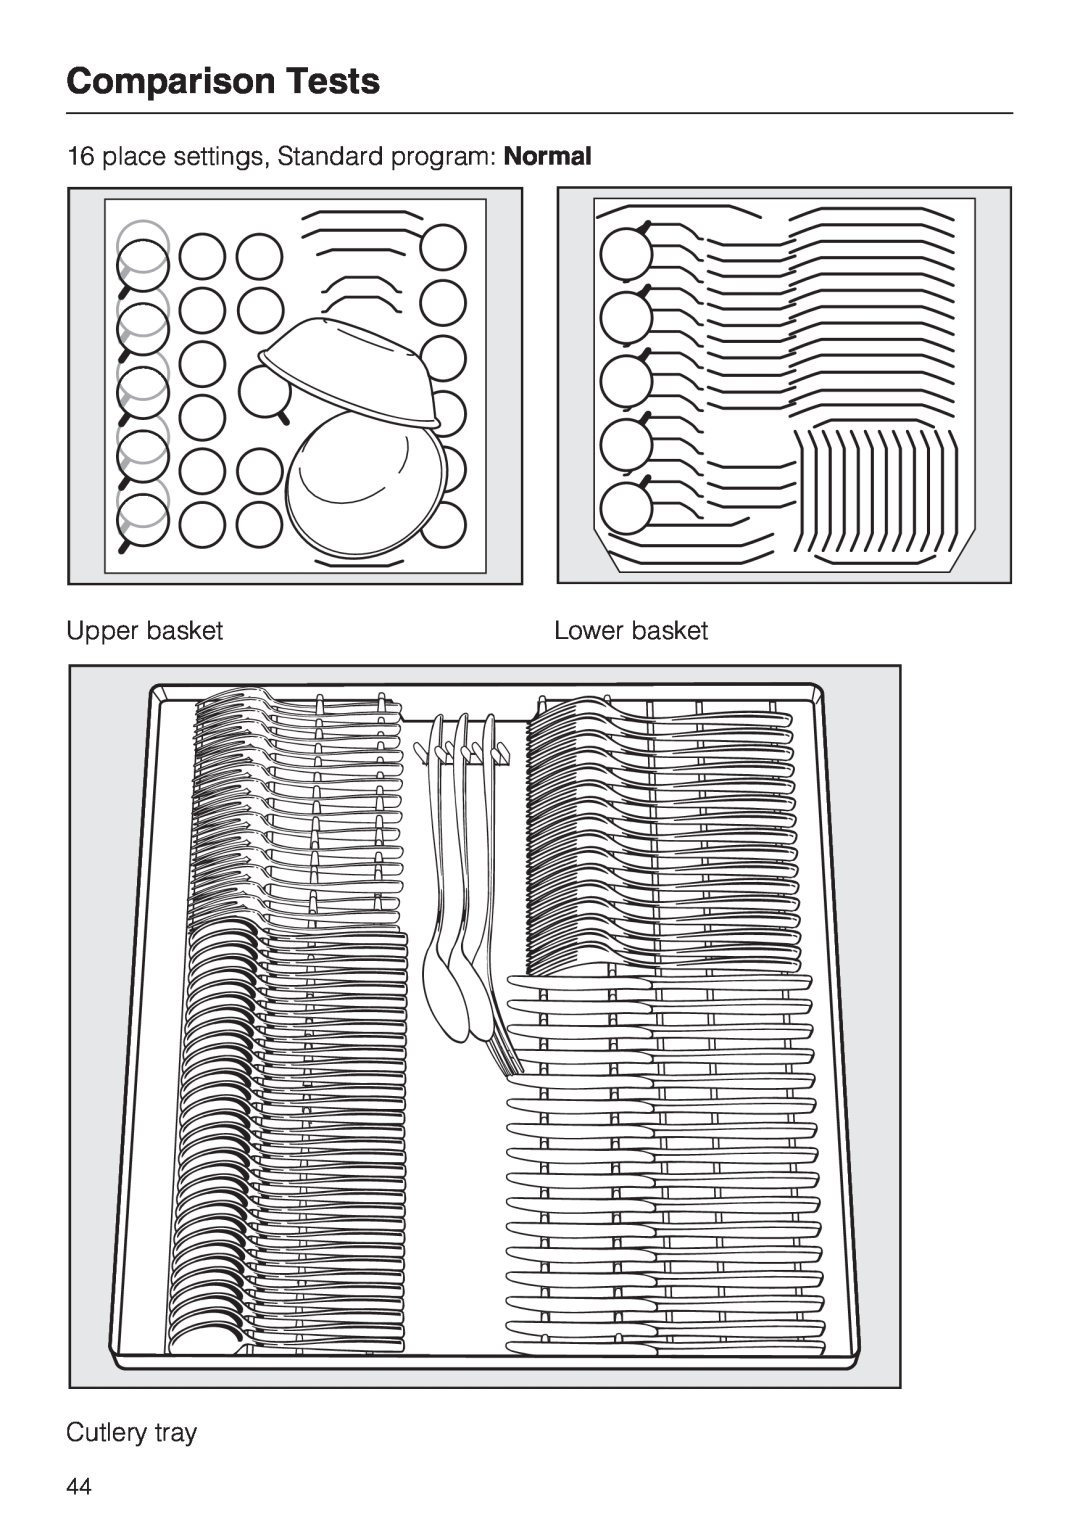 Miele G 2472, G 1472 Comparison Tests, place settings, Standard program Normal, Upper basket, Lower basket, Cutlery tray 